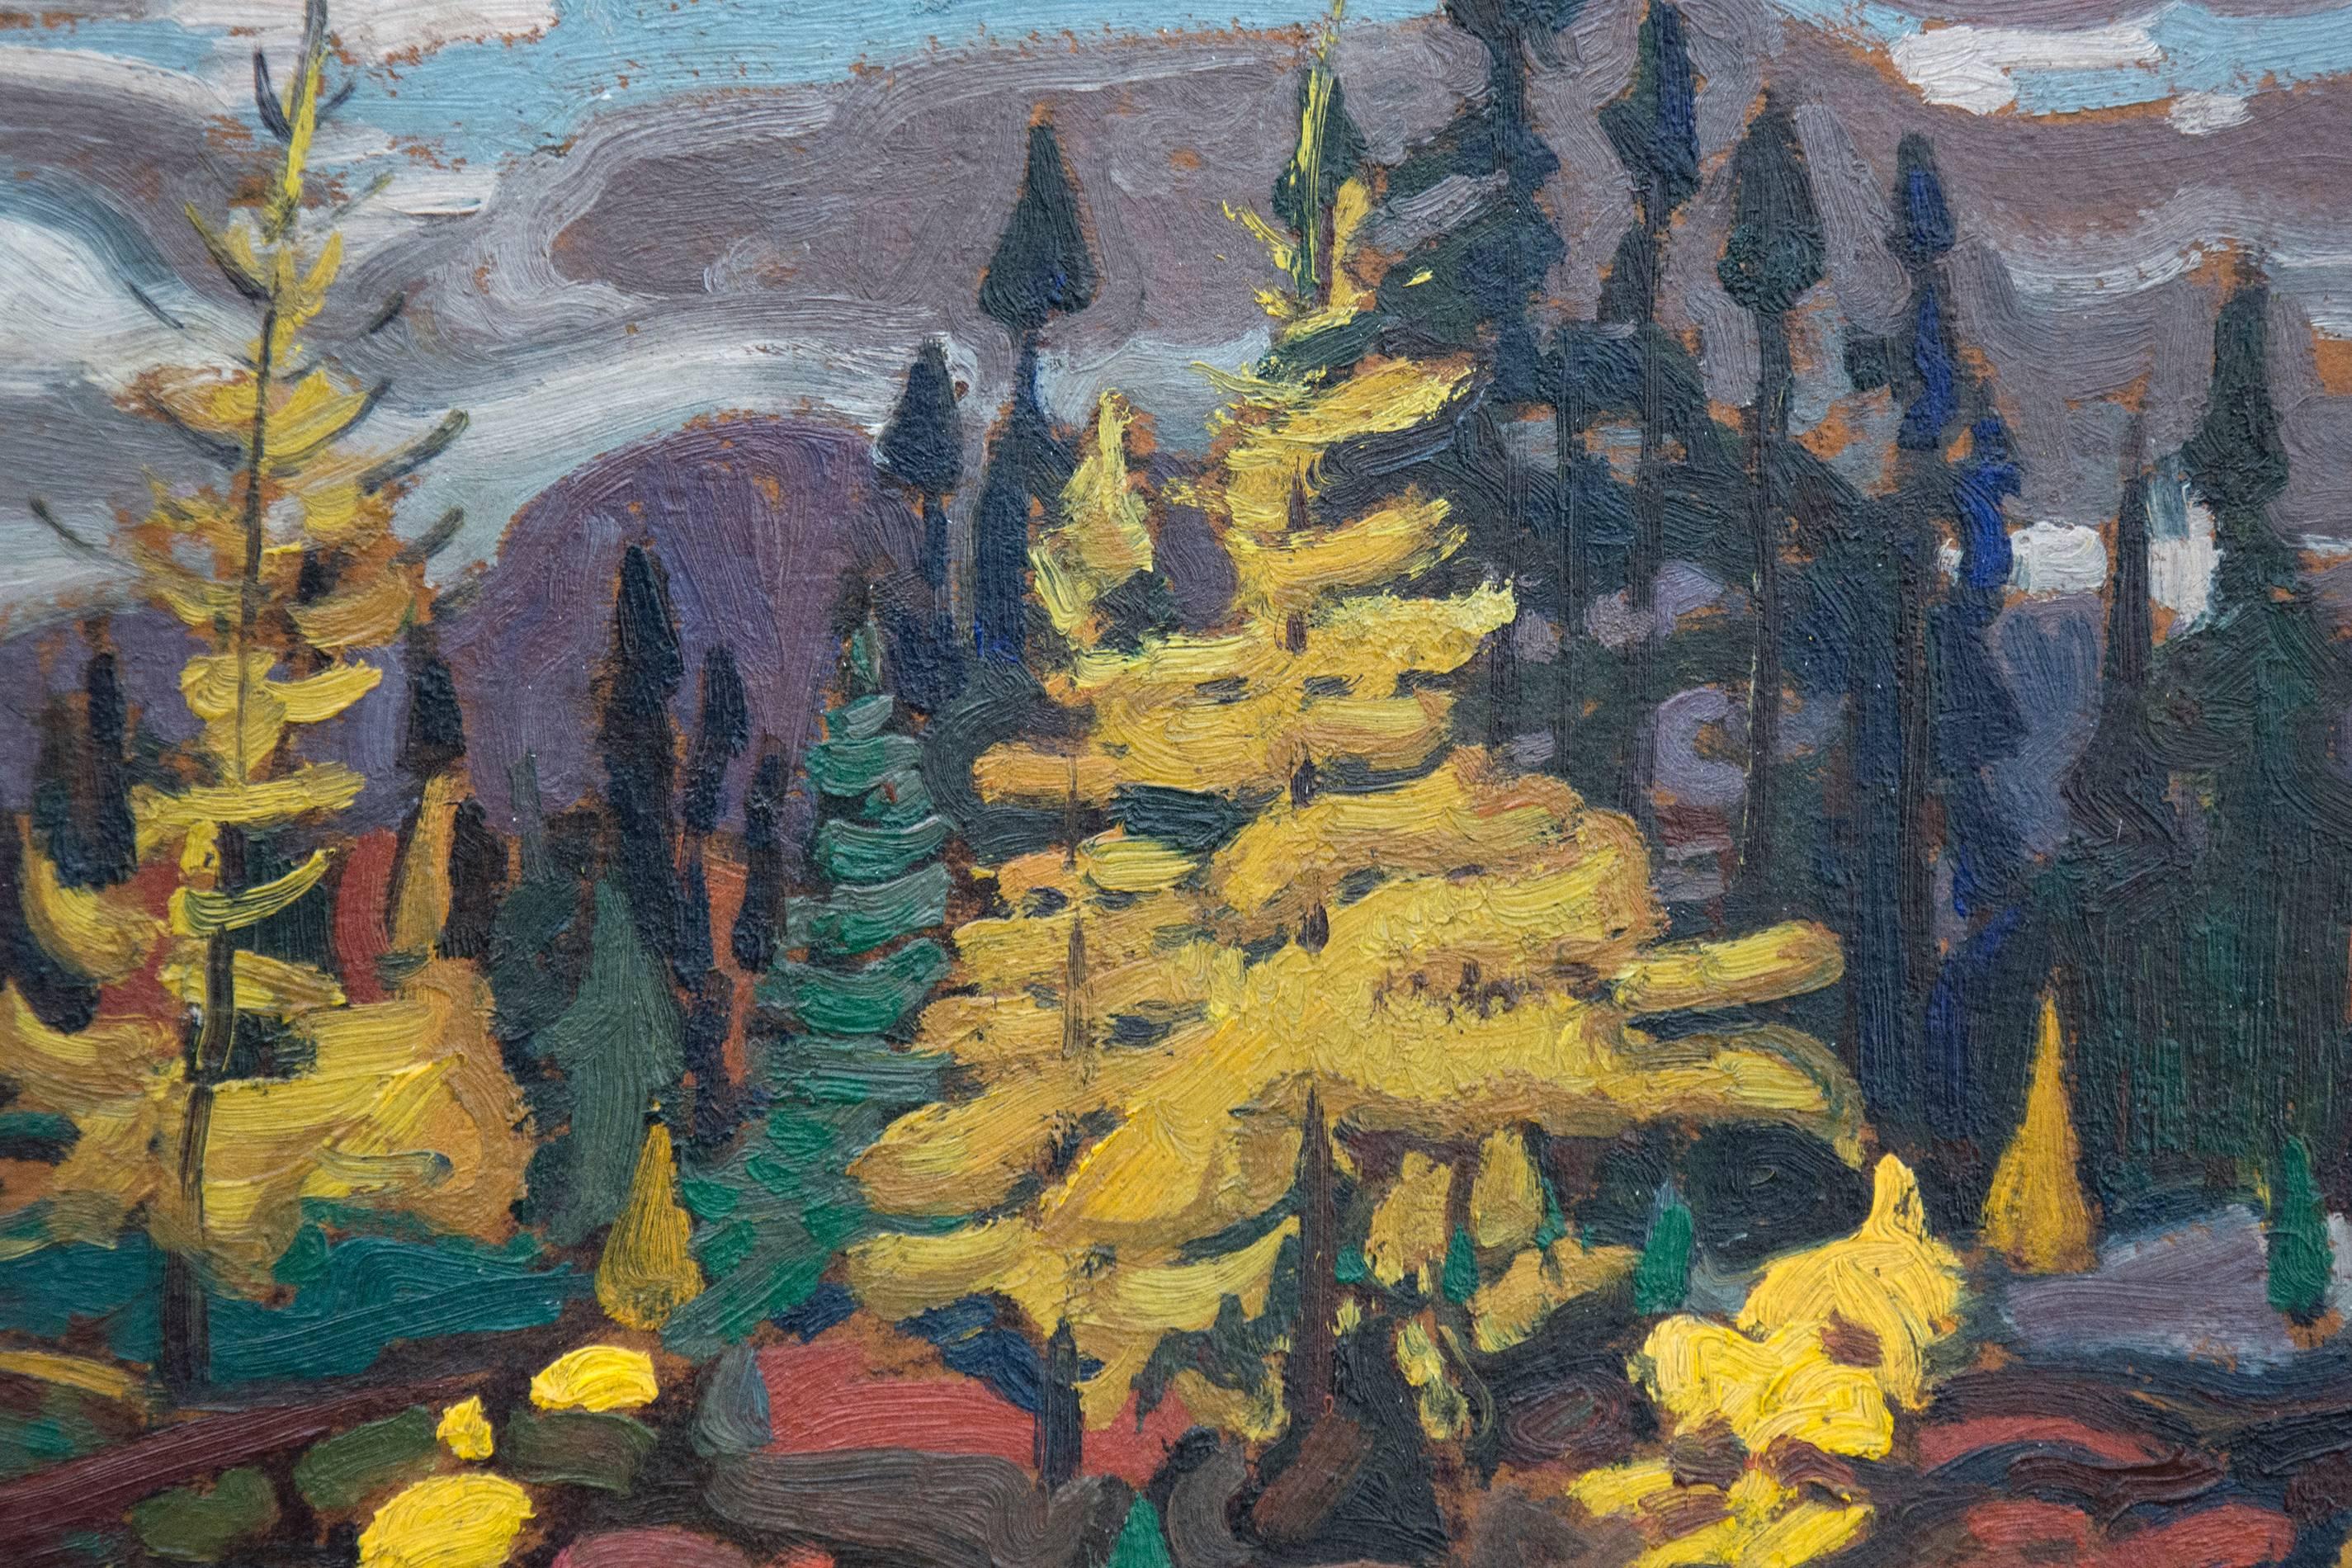 An excellent example of Lismer's work - this 1927 sketch, painted on the shores of Lake Superior. The colors of fall are in the background, and in the foreground the prominent yellow spruce - frequently used as a symbol of spirituality and